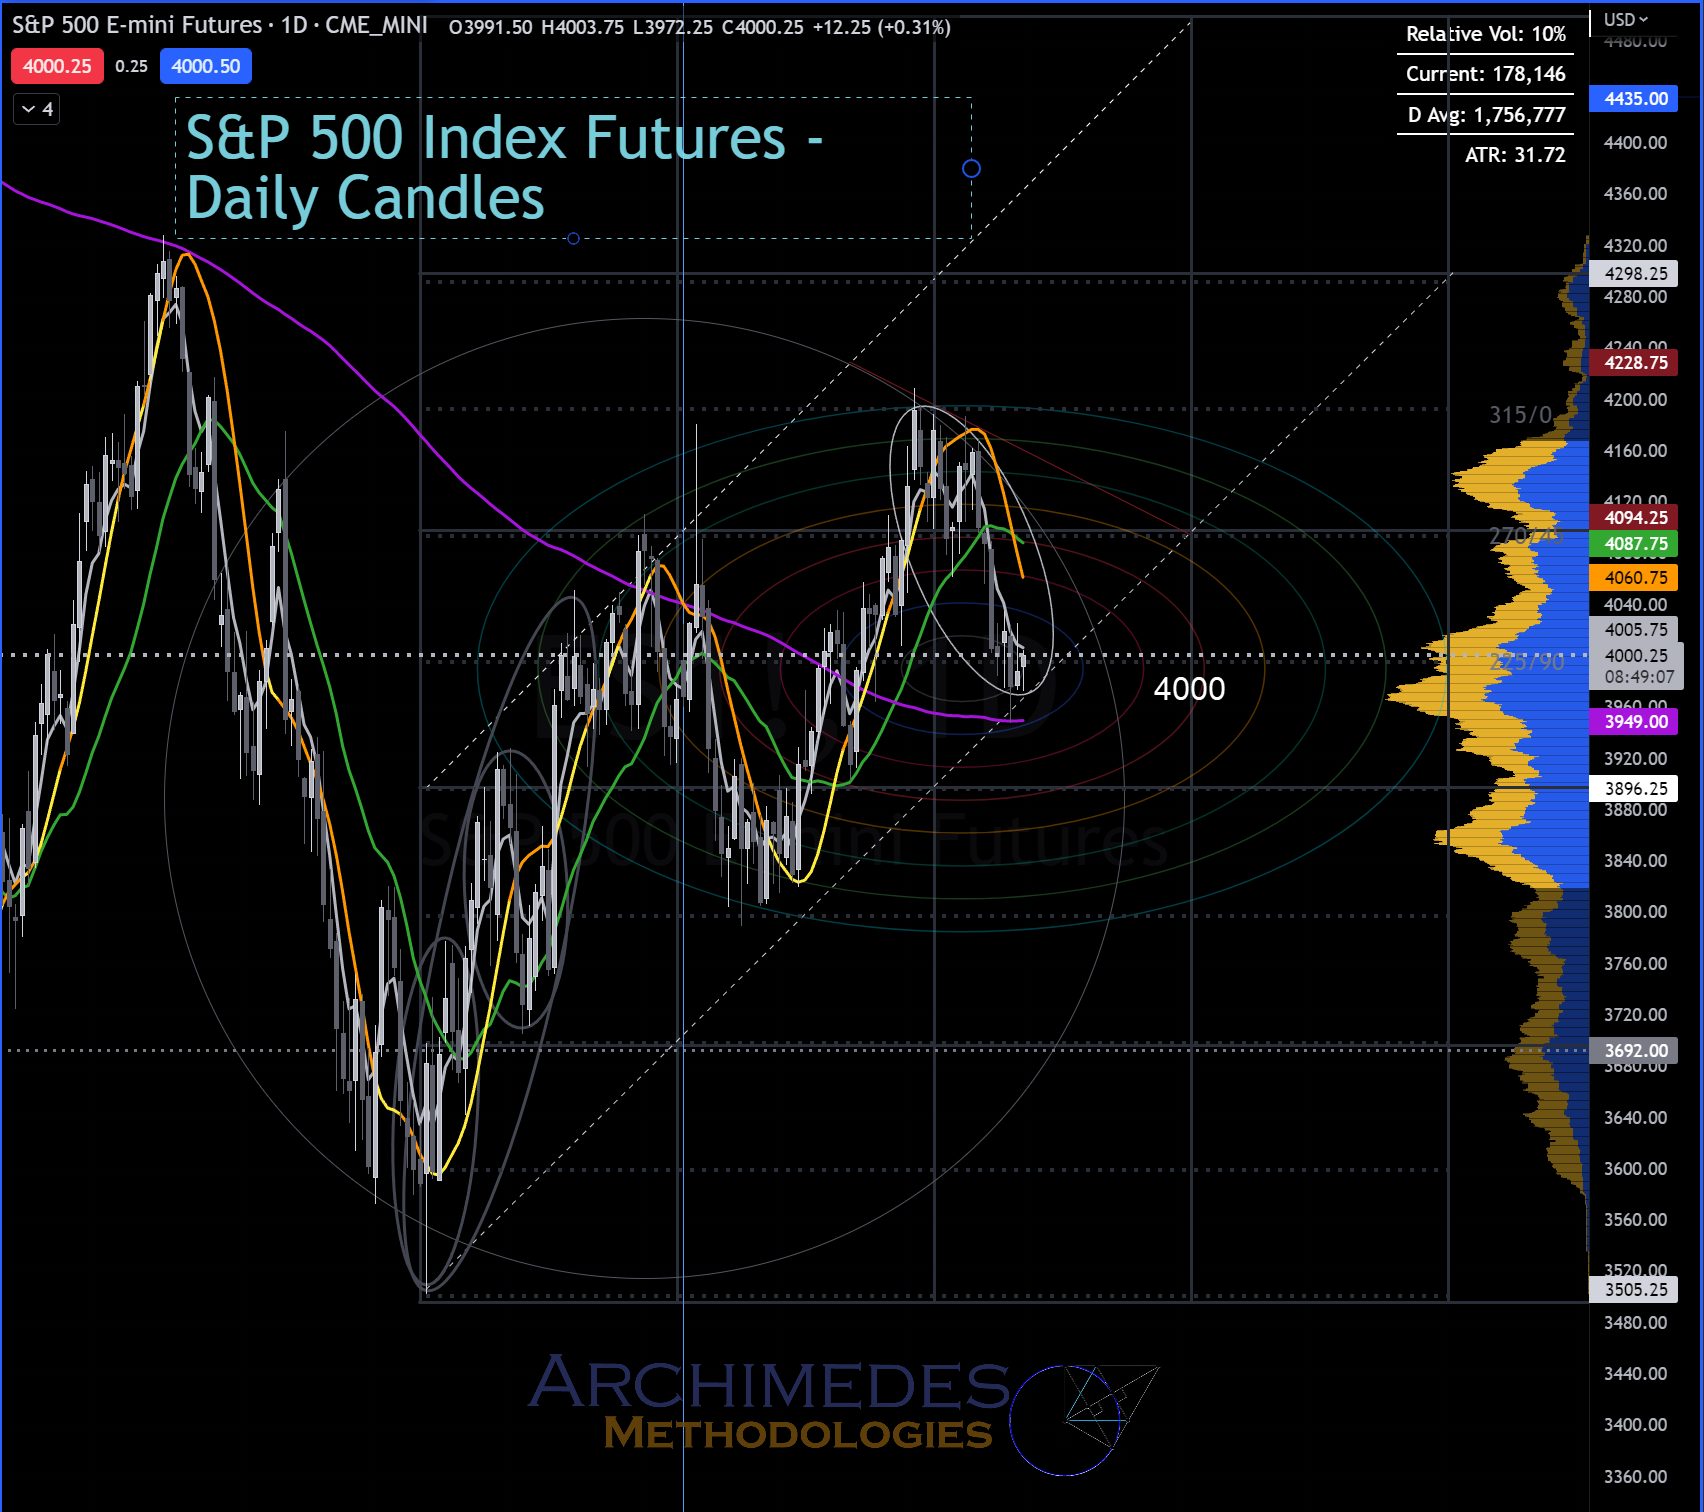 S&P 500 Index Futures - Daily Chart - Can the Bulls Hold the Bottom of the Bull Channel at 4000? (Click to Enlarge).